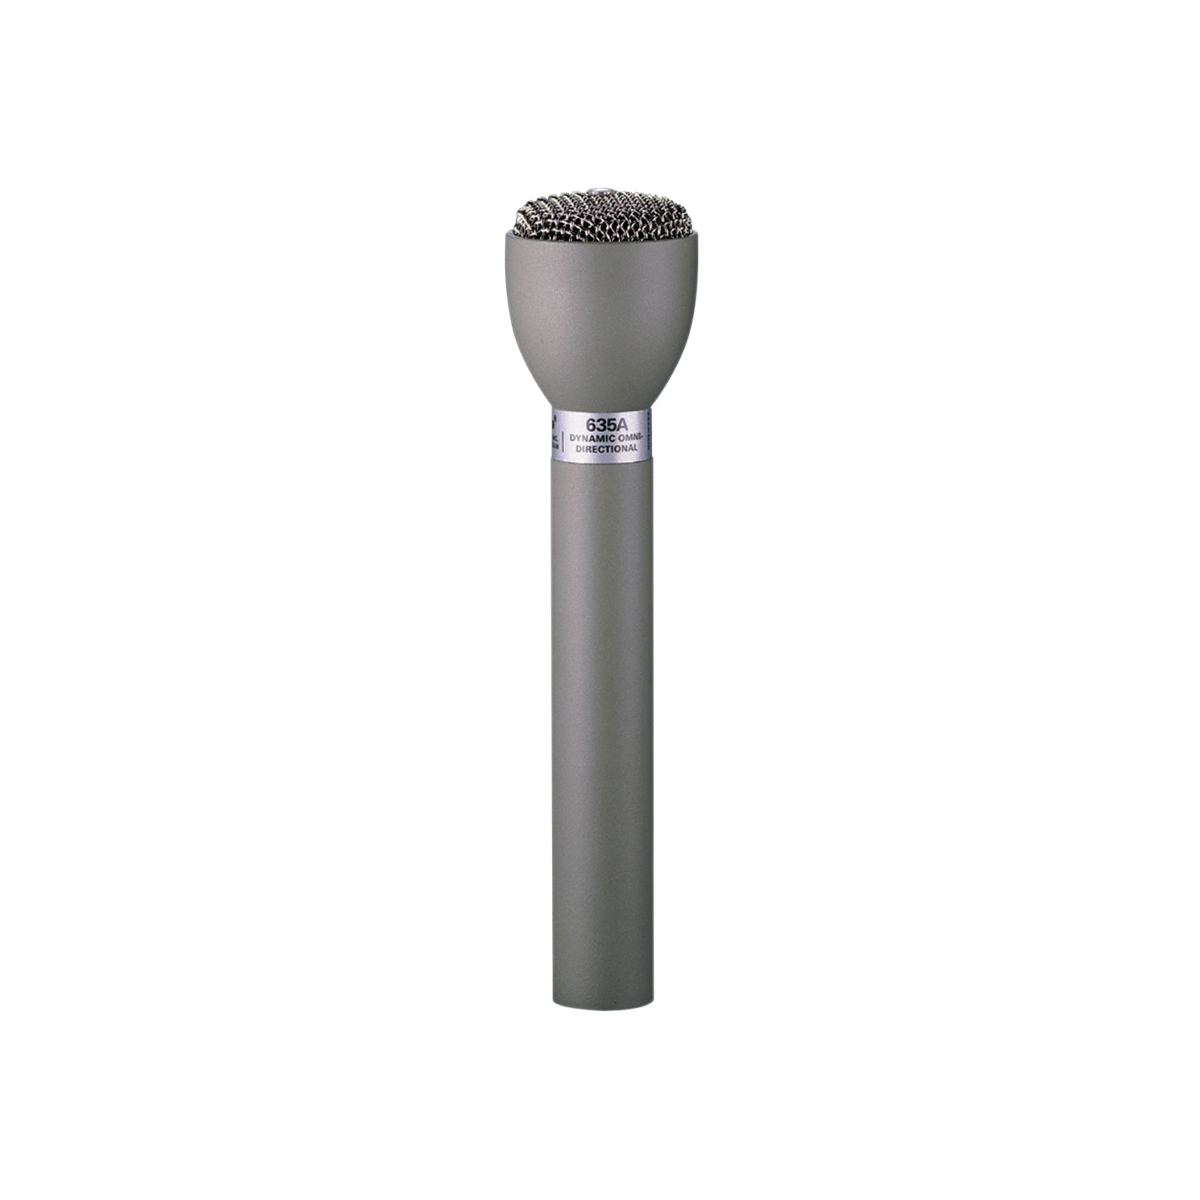 635A Classic Handheld Interview Microphone